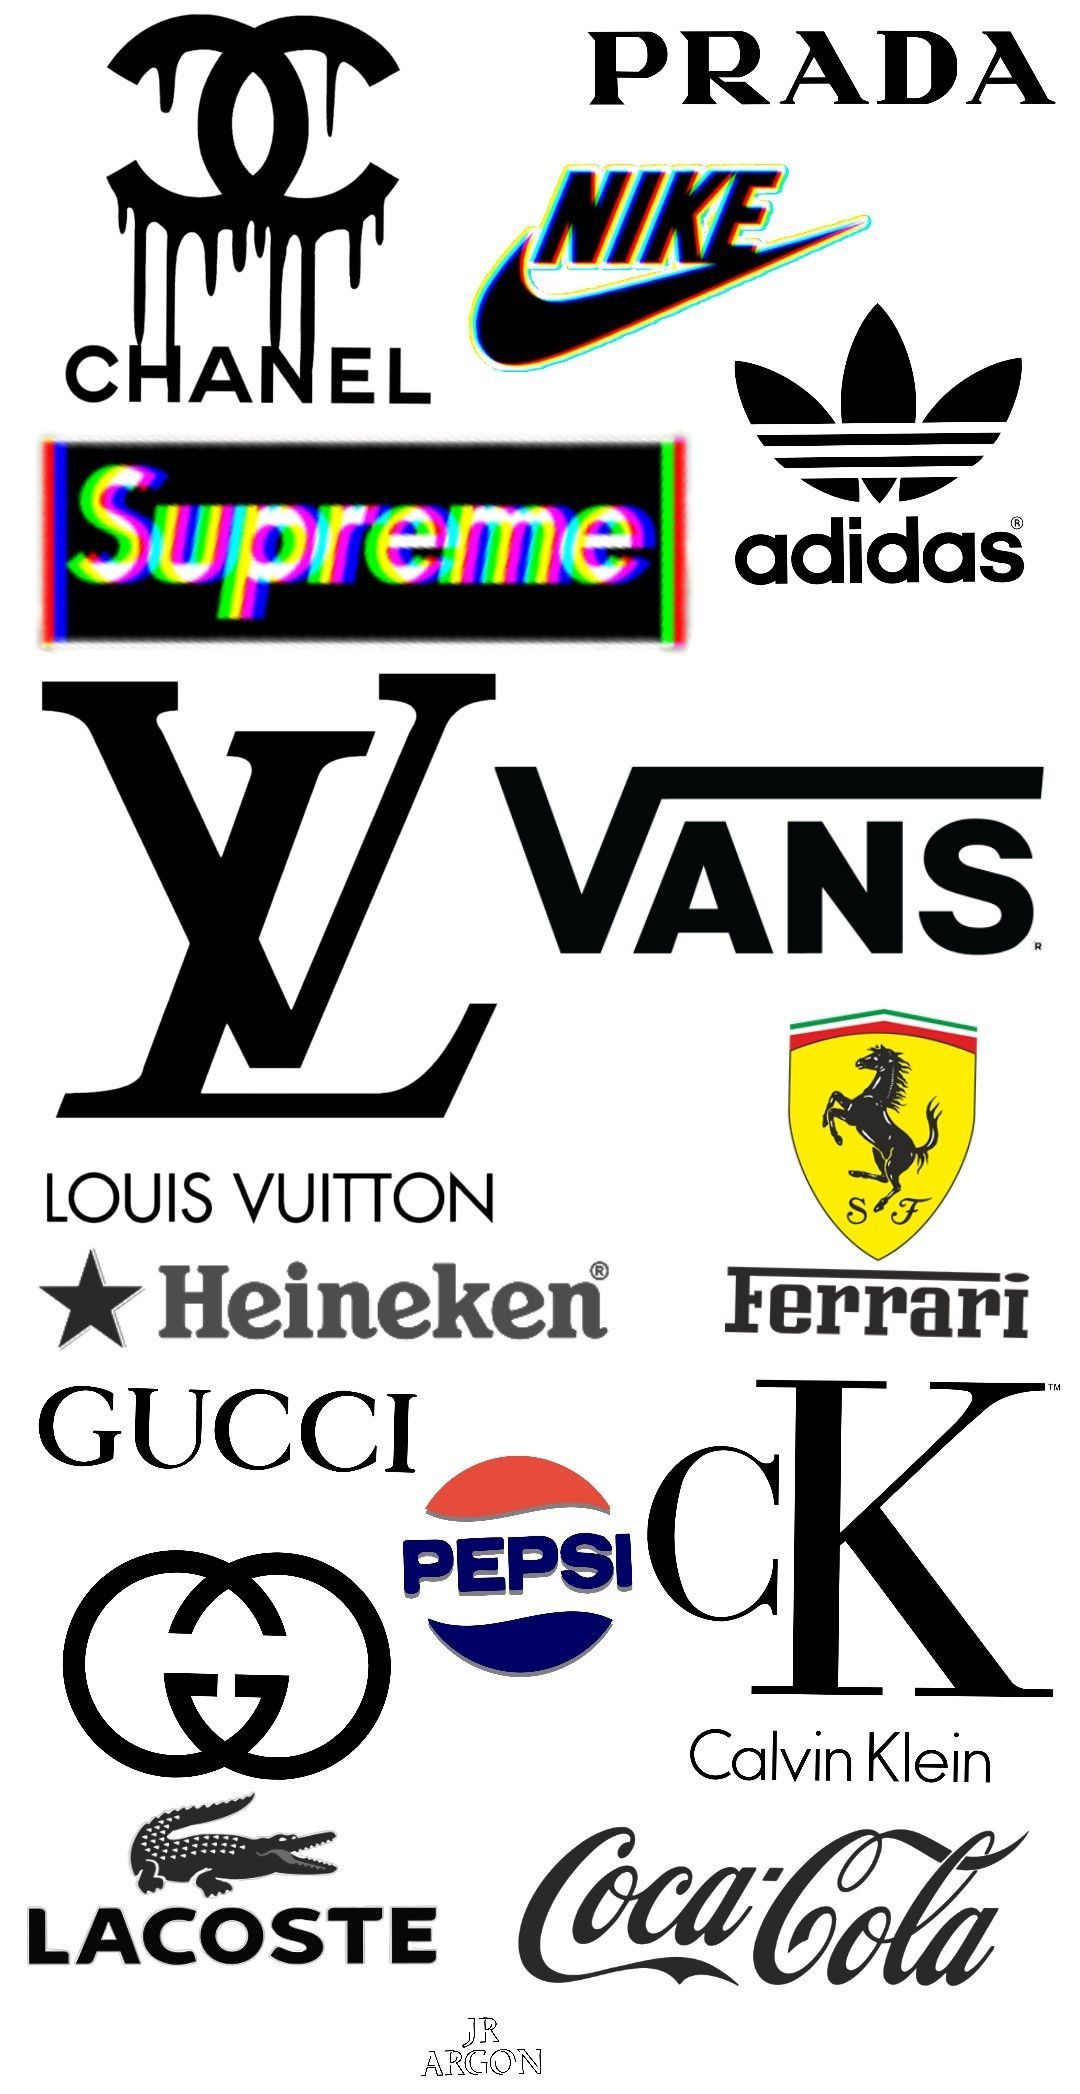 The best brands in one image only the best brand wallpaper. Adidas iphone wallpaper, Logo wallpaper hd, Samsung galaxy s8 wallpaper